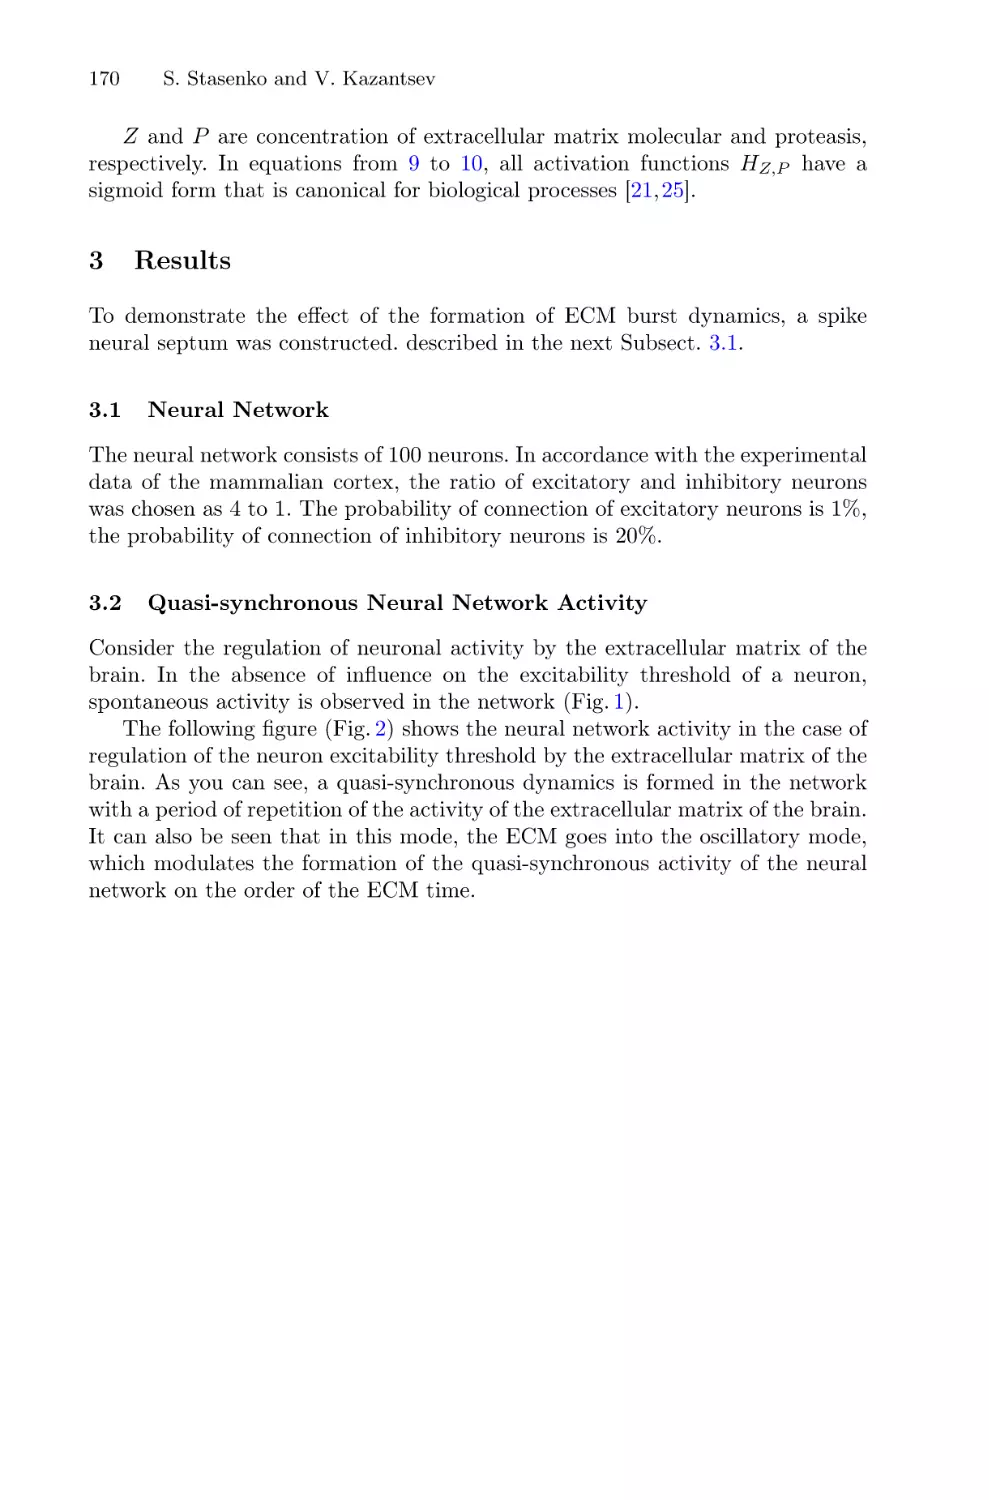 3 Results
3.1 Neural Network
3.2 Quasi-synchronous Neural Network Activity